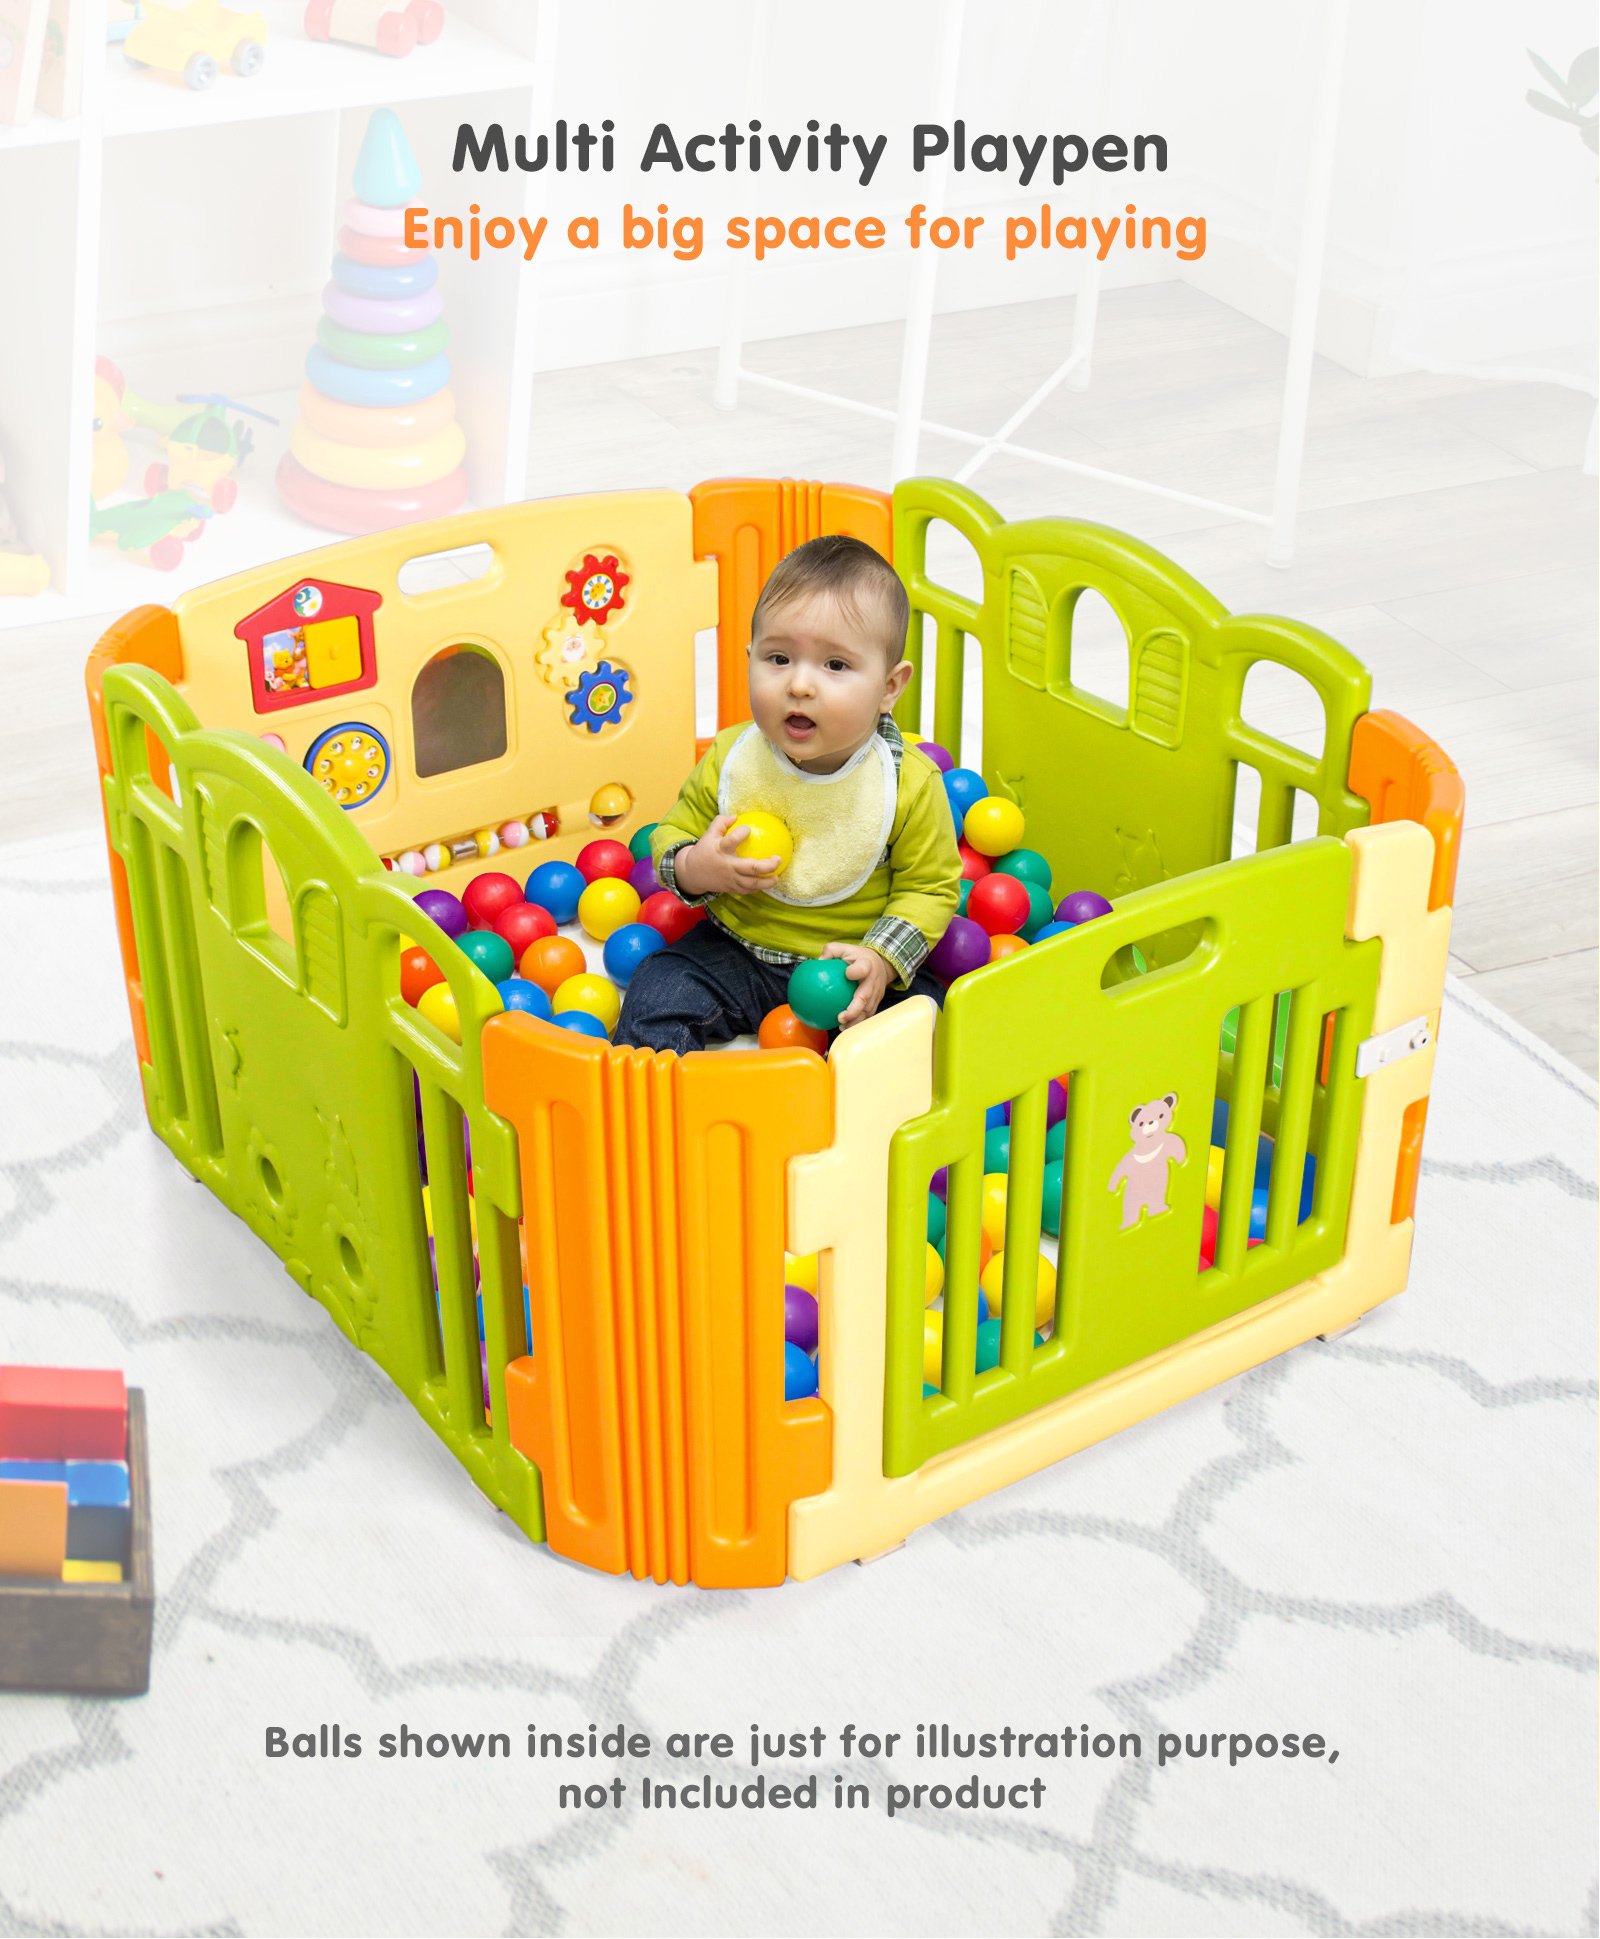 Baby Play Yards Lets You Do More Fun Baby Playpen with Soft Educational Playmat to Keep Your Kids Safe Store Kids Toys in The Toddler Play Yard Play Pen Play Pens for Babies and Toddlers 